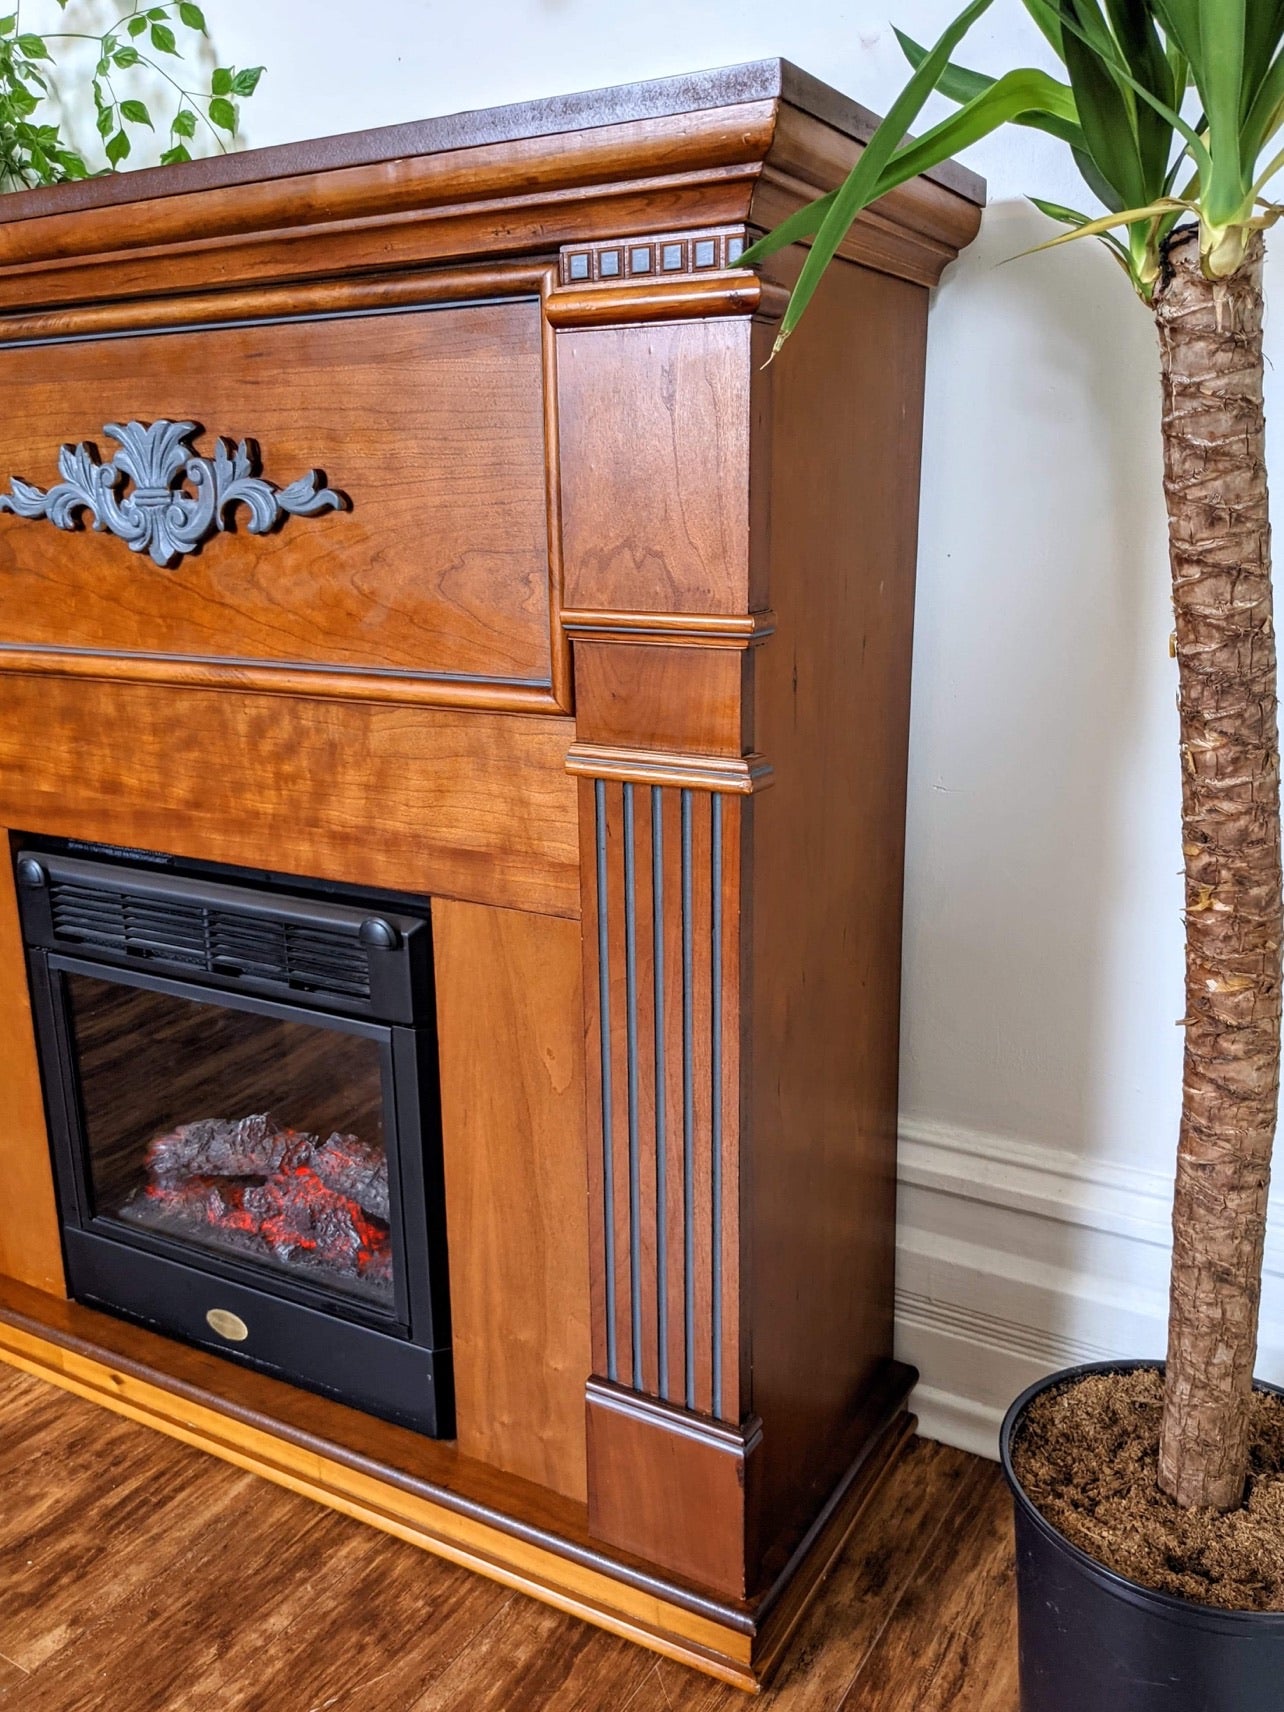 The Crawford Fireplace